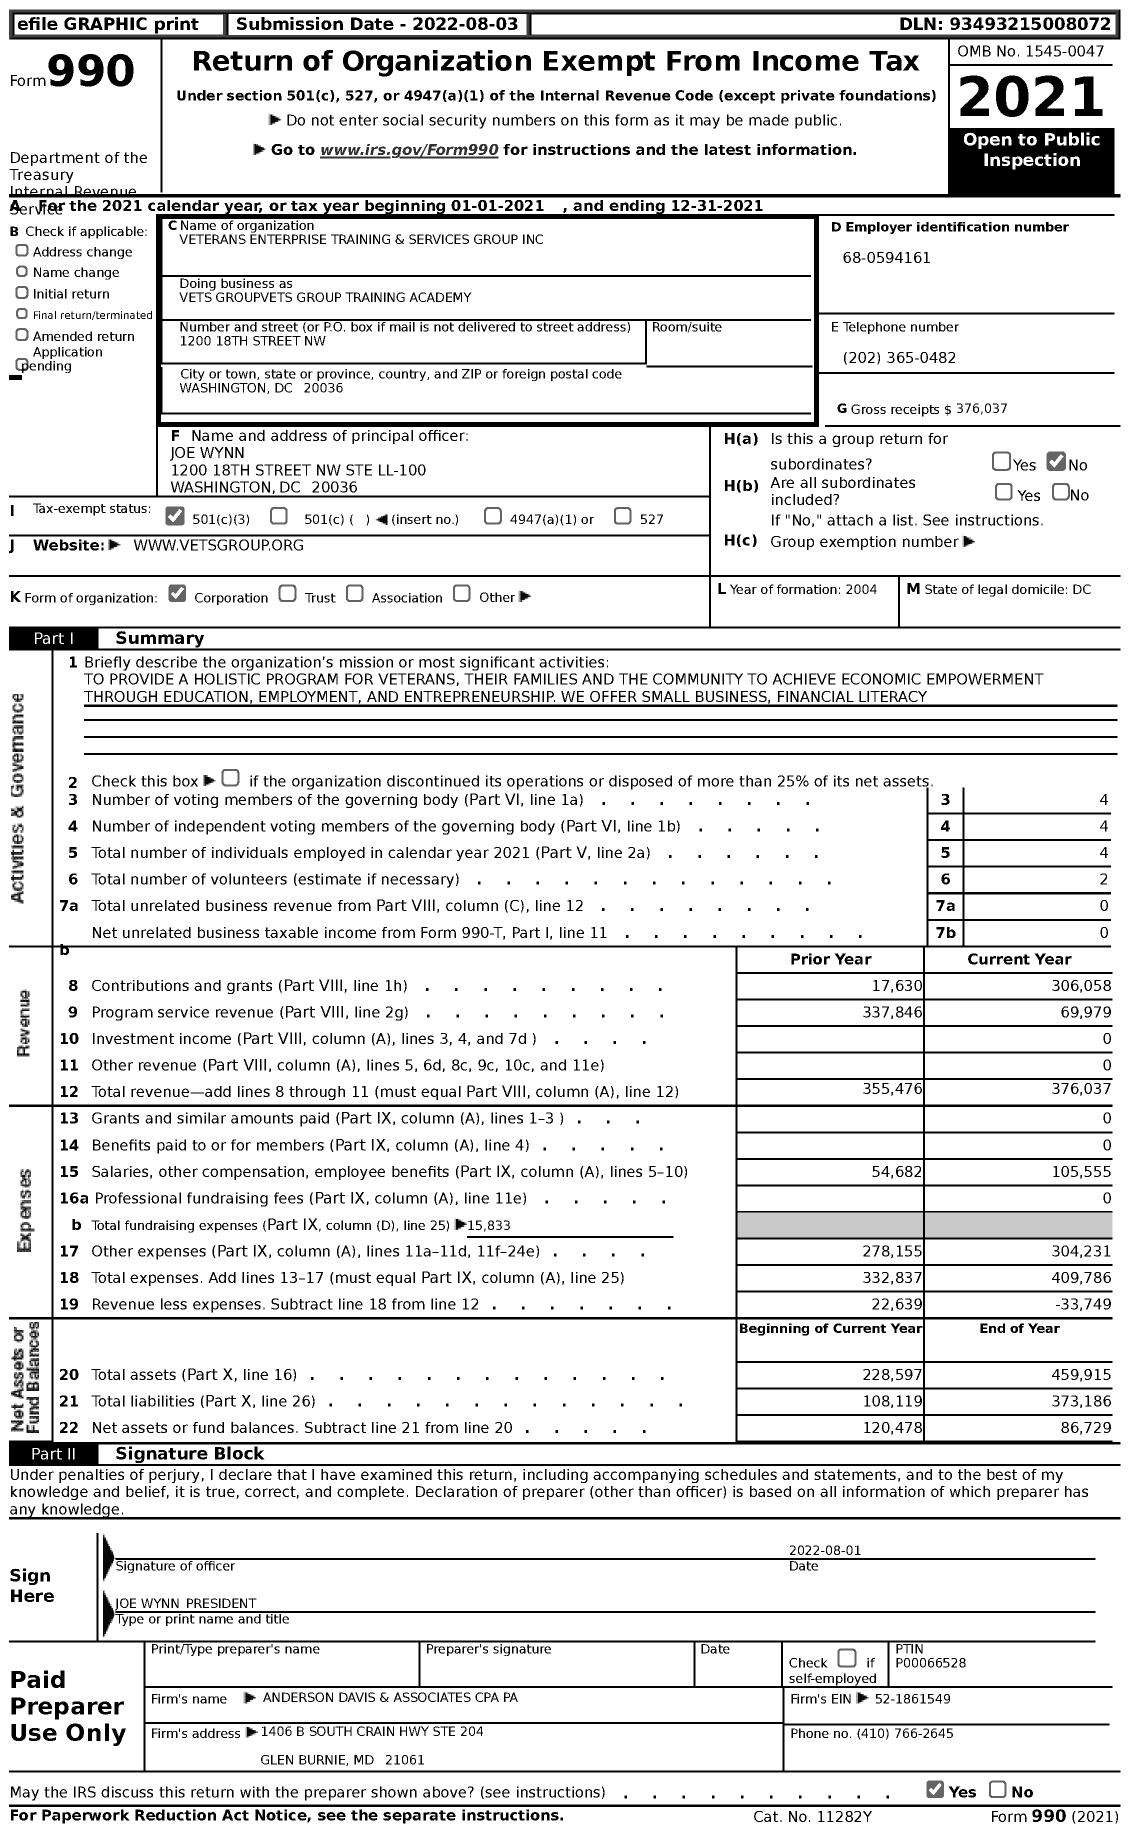 Image of first page of 2021 Form 990 for Vets Groupvets Group Training Academy